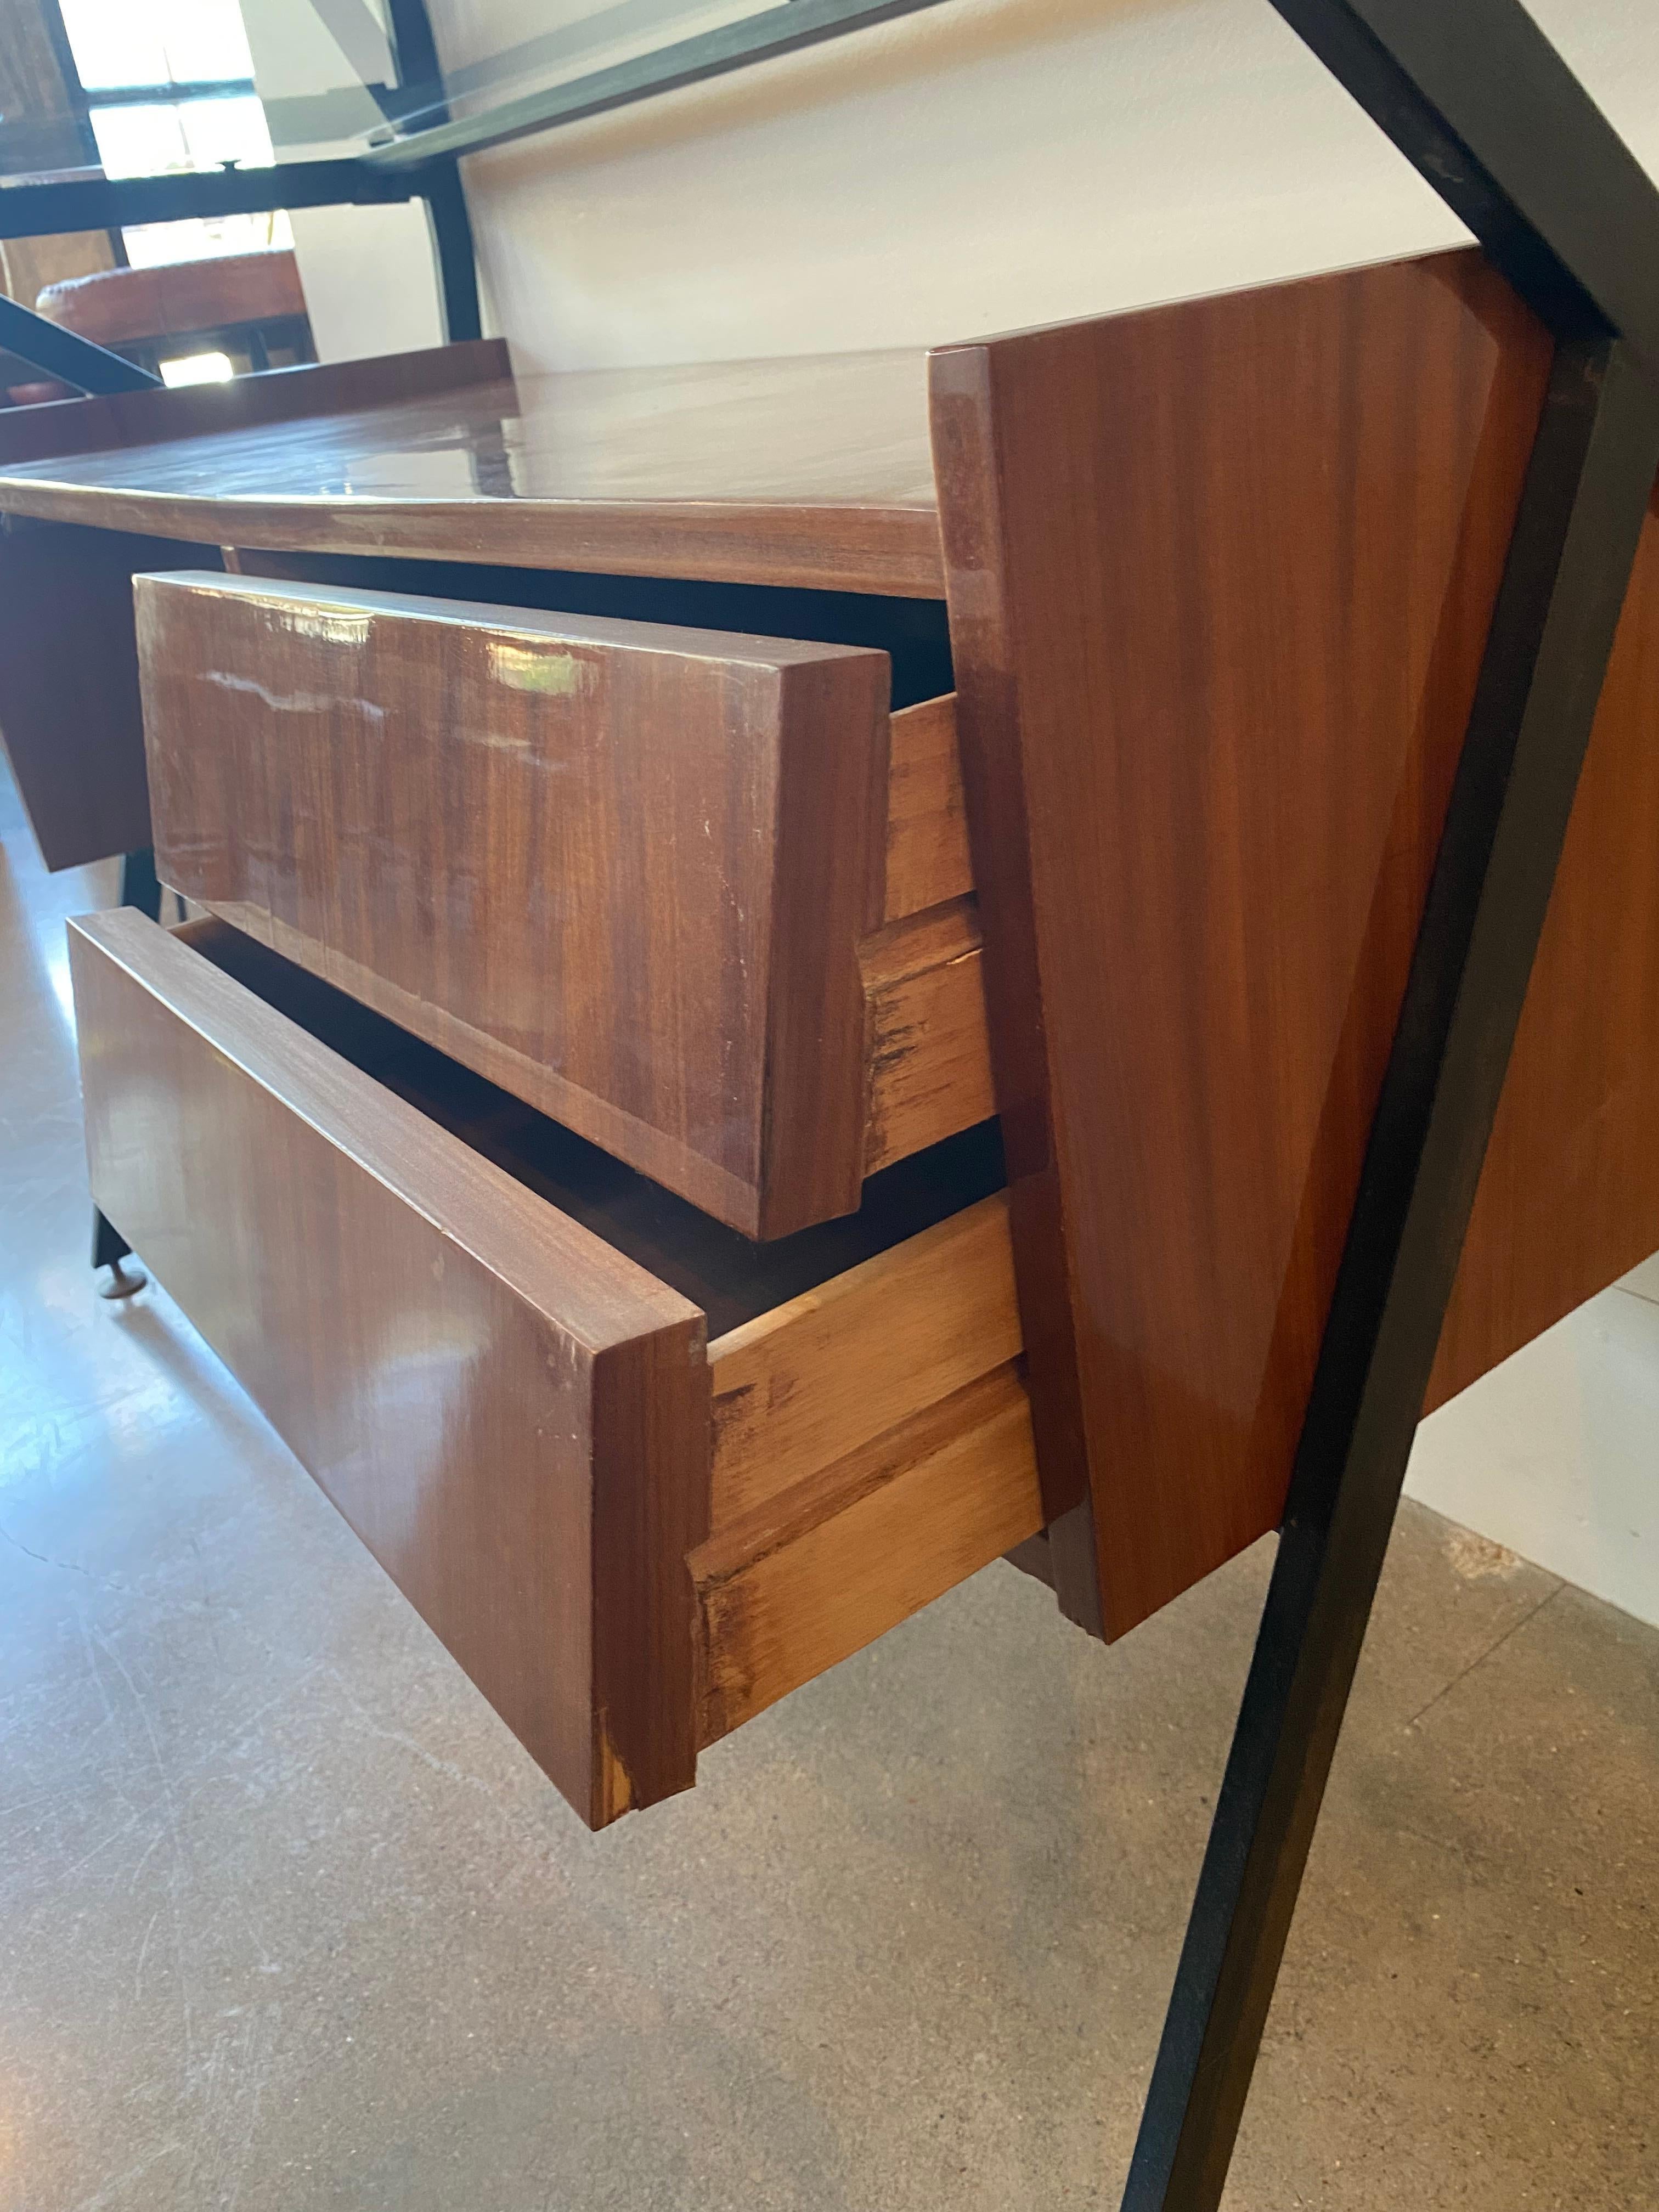 Italian Mid-Century Modern Desk with Shelves, Style of Ico Parisi For Sale 2